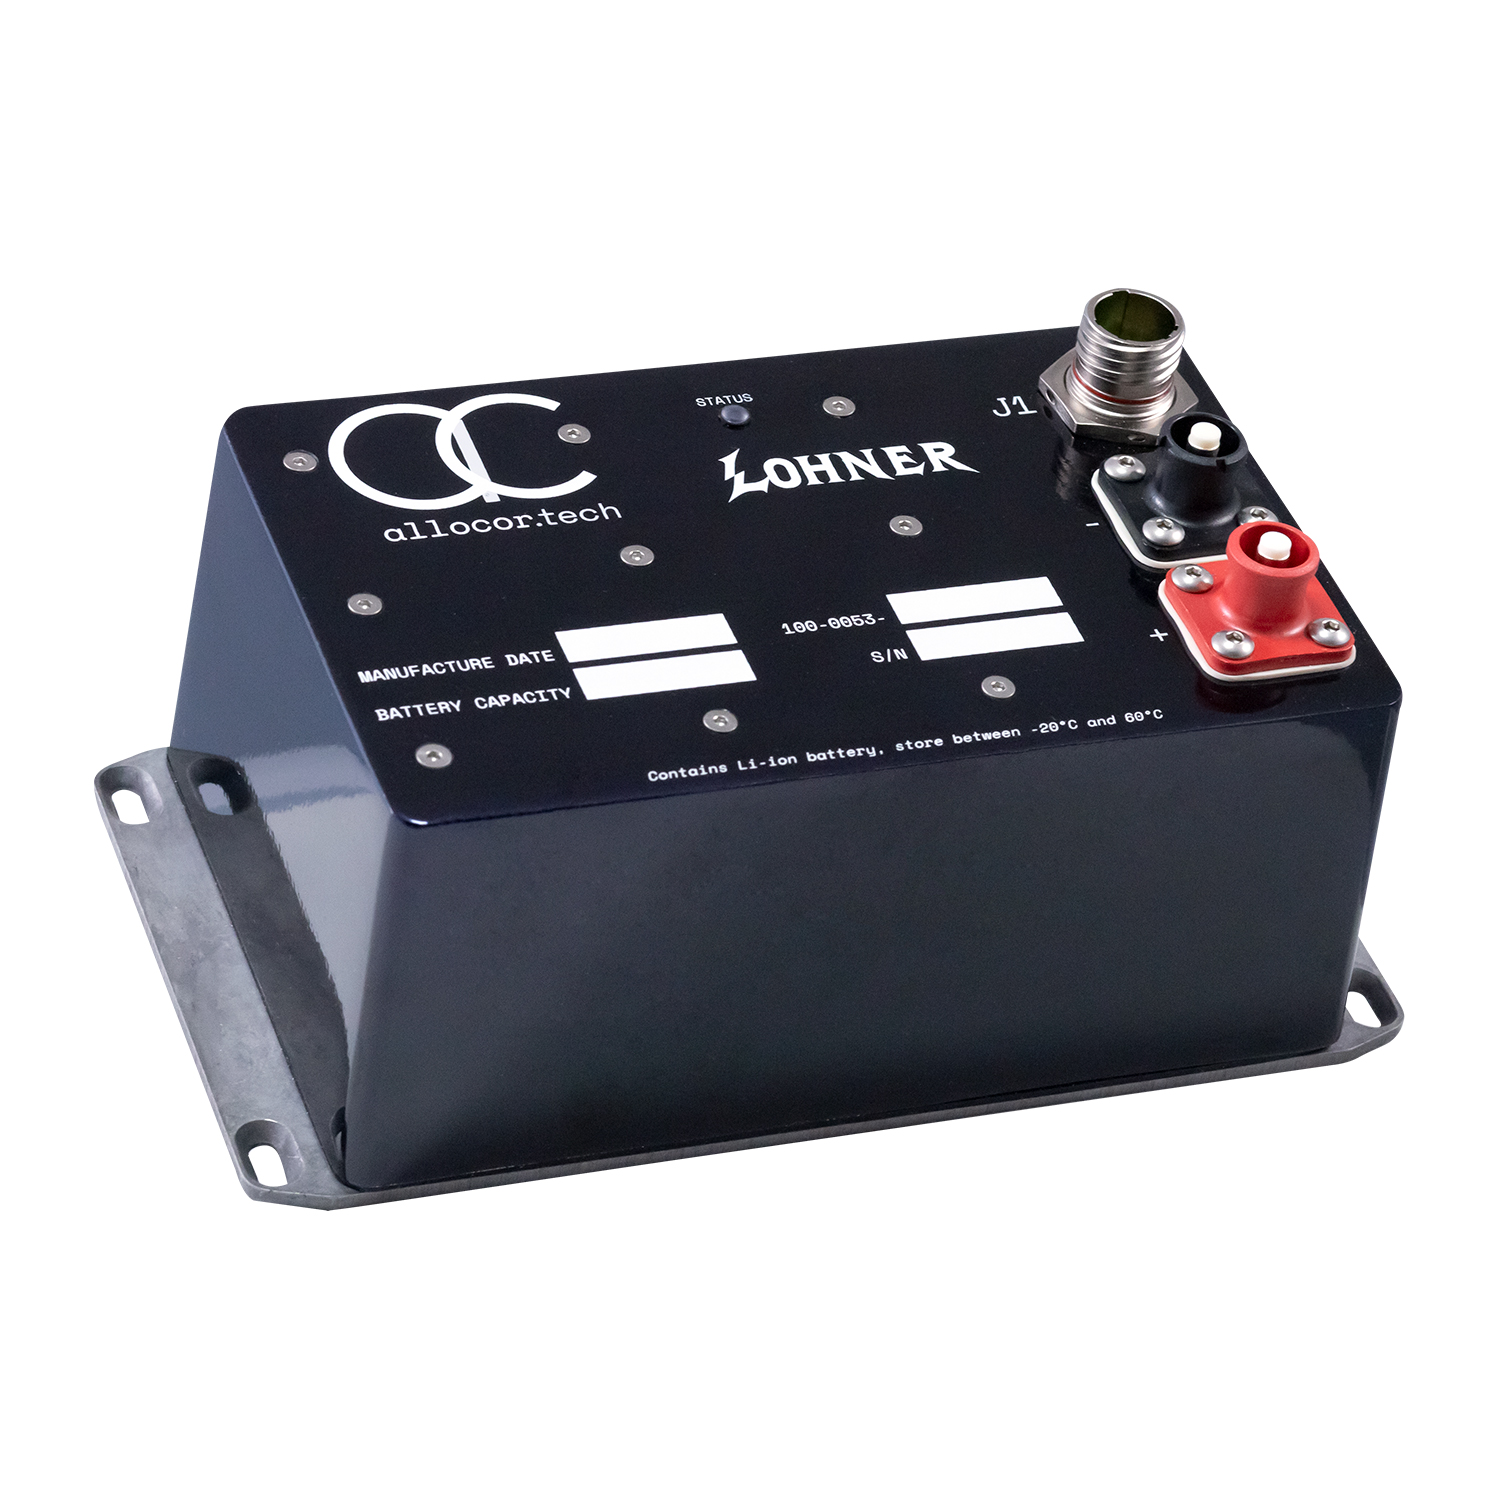 Lohner Product View